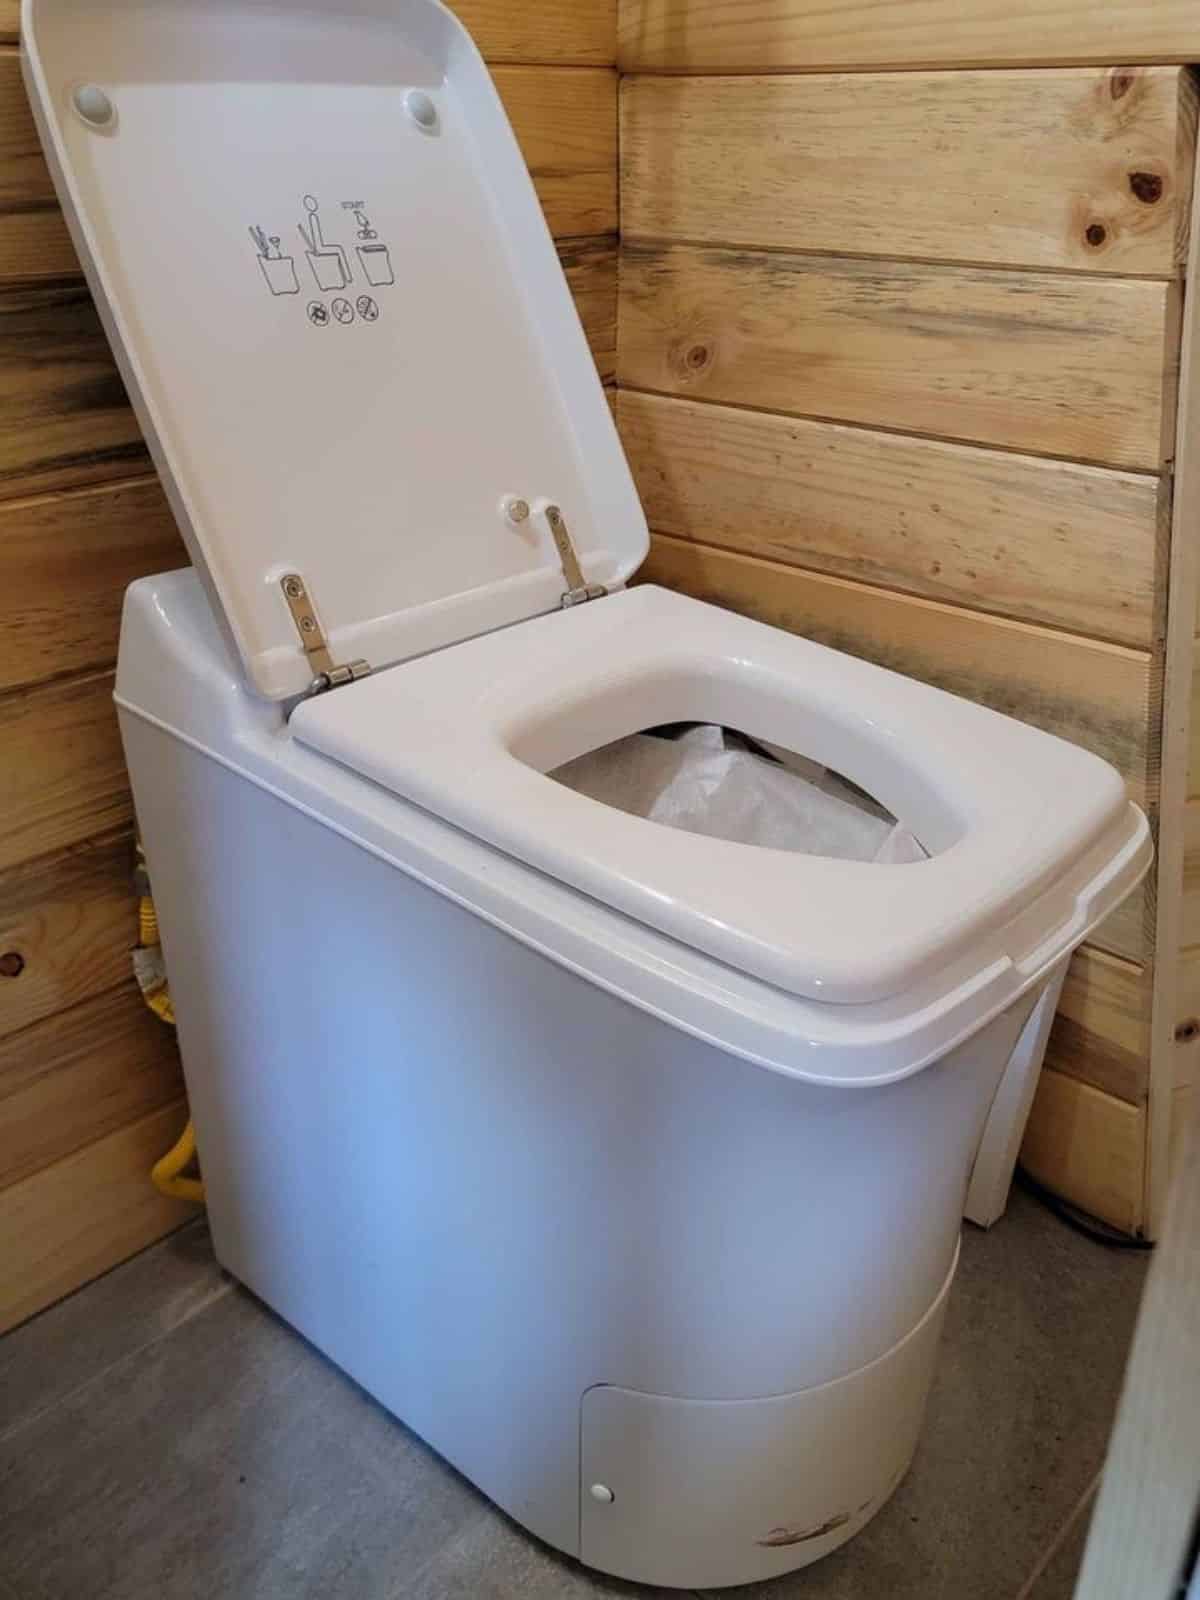 propane powered incinerator toilet installed in bathroom of 1 bedroom tiny house